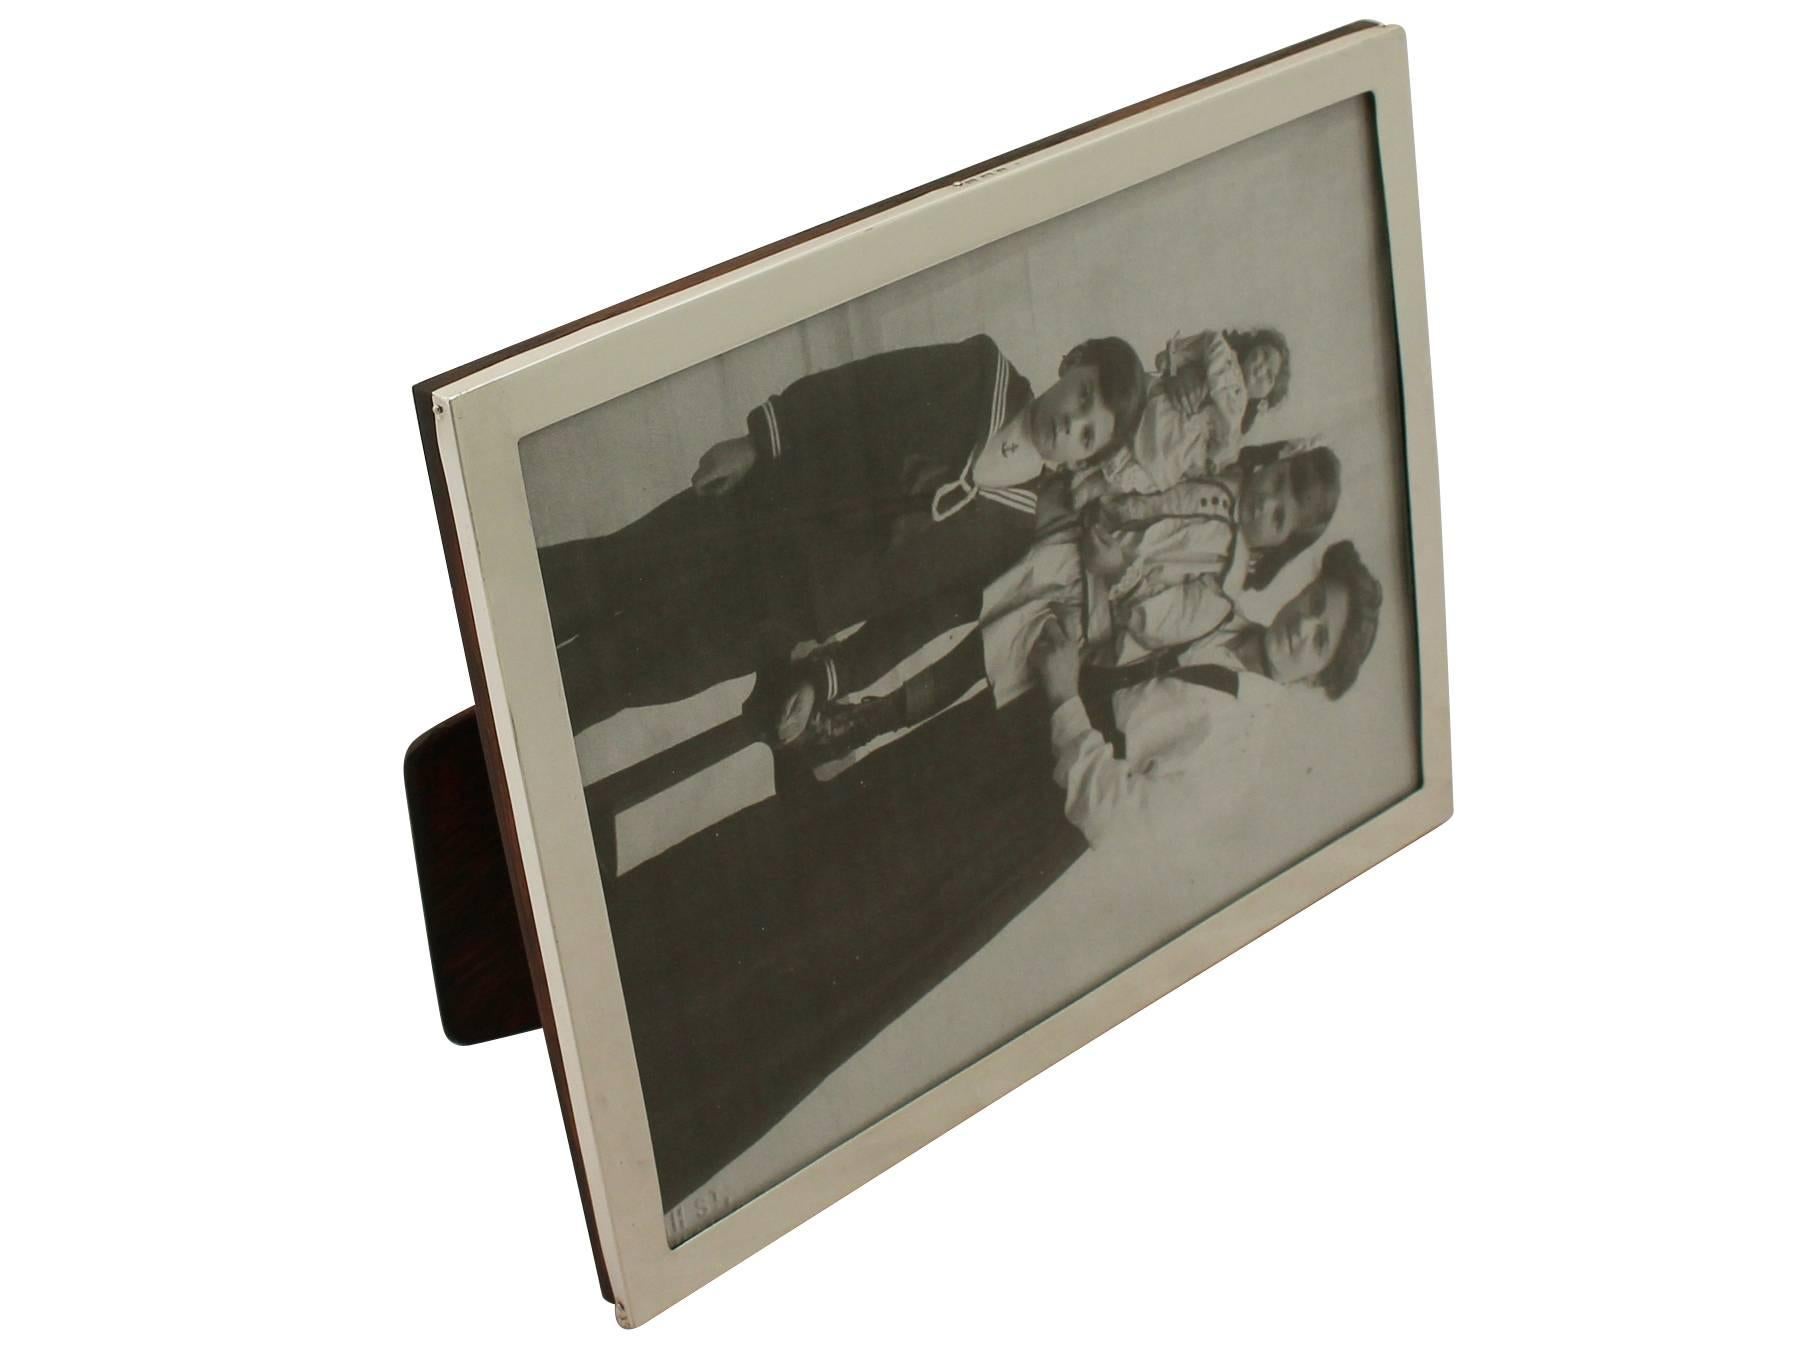 An exceptional, fine and impressive antique George V English sterling silver photograph frame, an addition to our collection of ornamental silverware.

This fine antique George V sterling silver photo frame has a plain rectangular form.

The